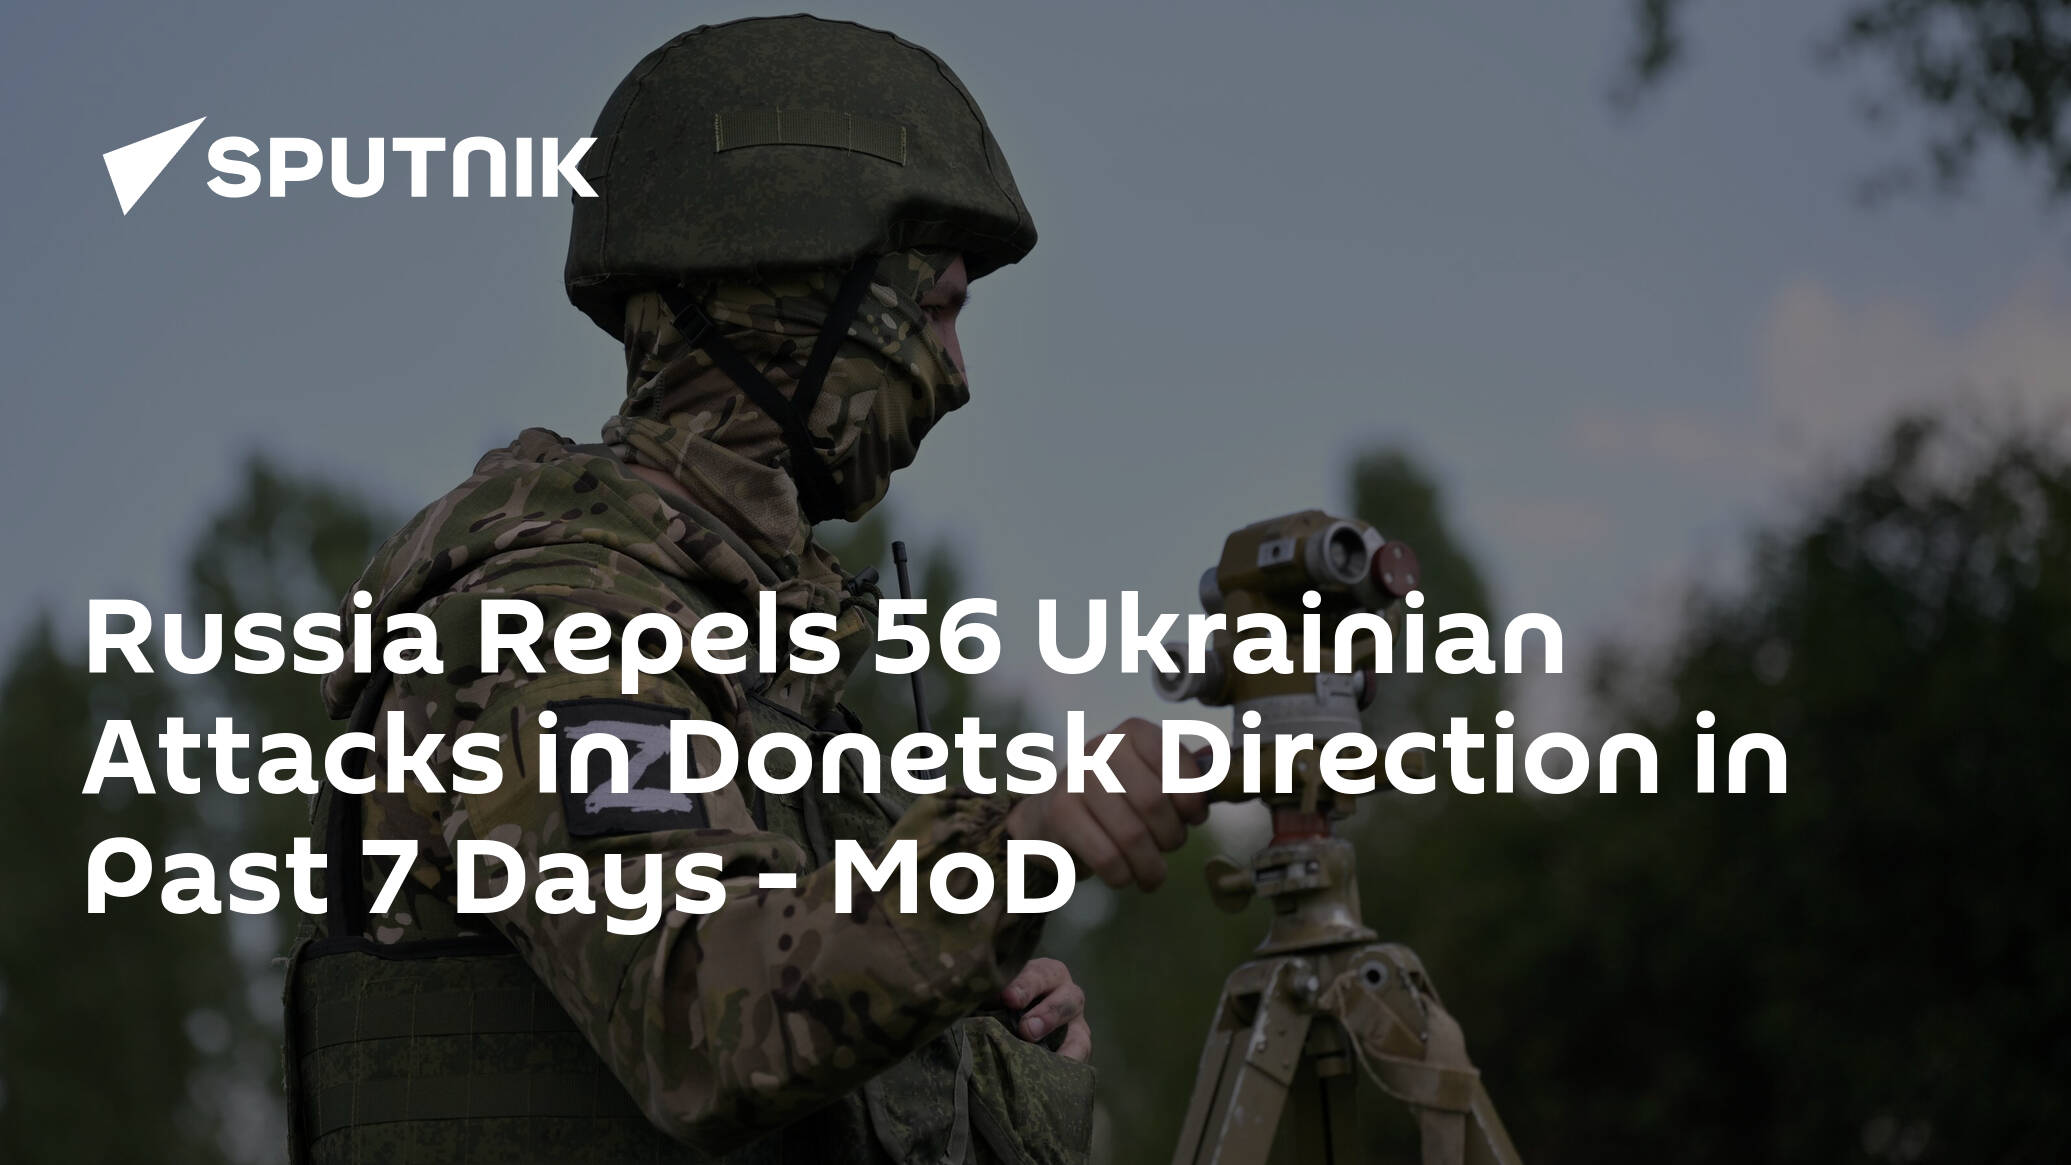 Russia Repels 56 Ukrainian Attacks in Donetsk Direction in Past 7 Days – MoD